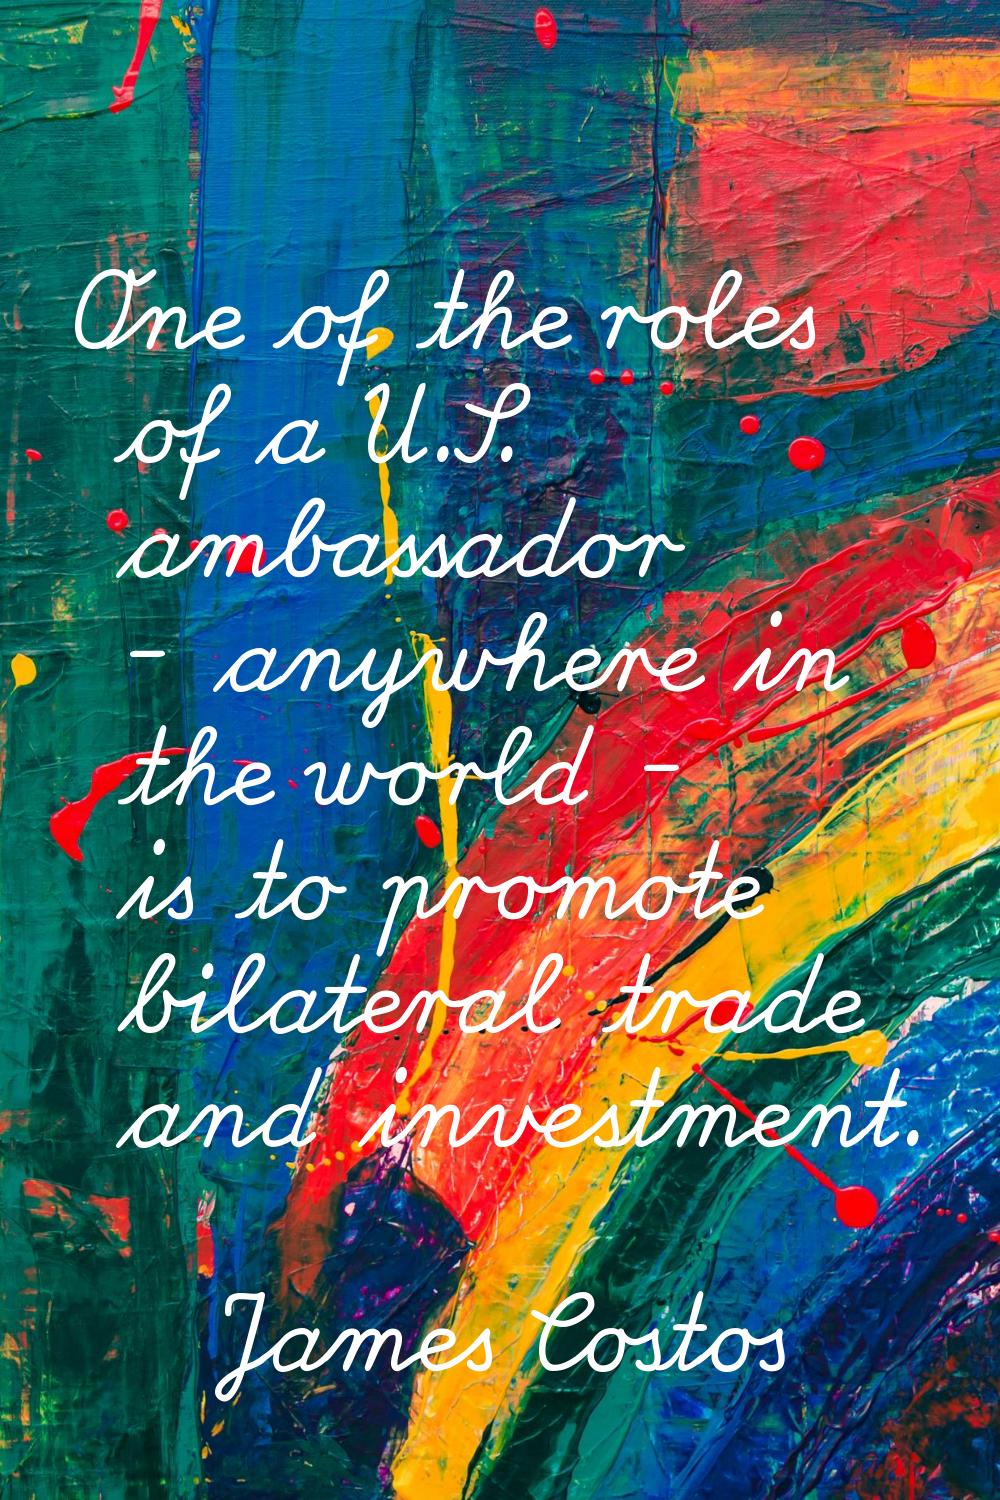 One of the roles of a U.S. ambassador - anywhere in the world - is to promote bilateral trade and i